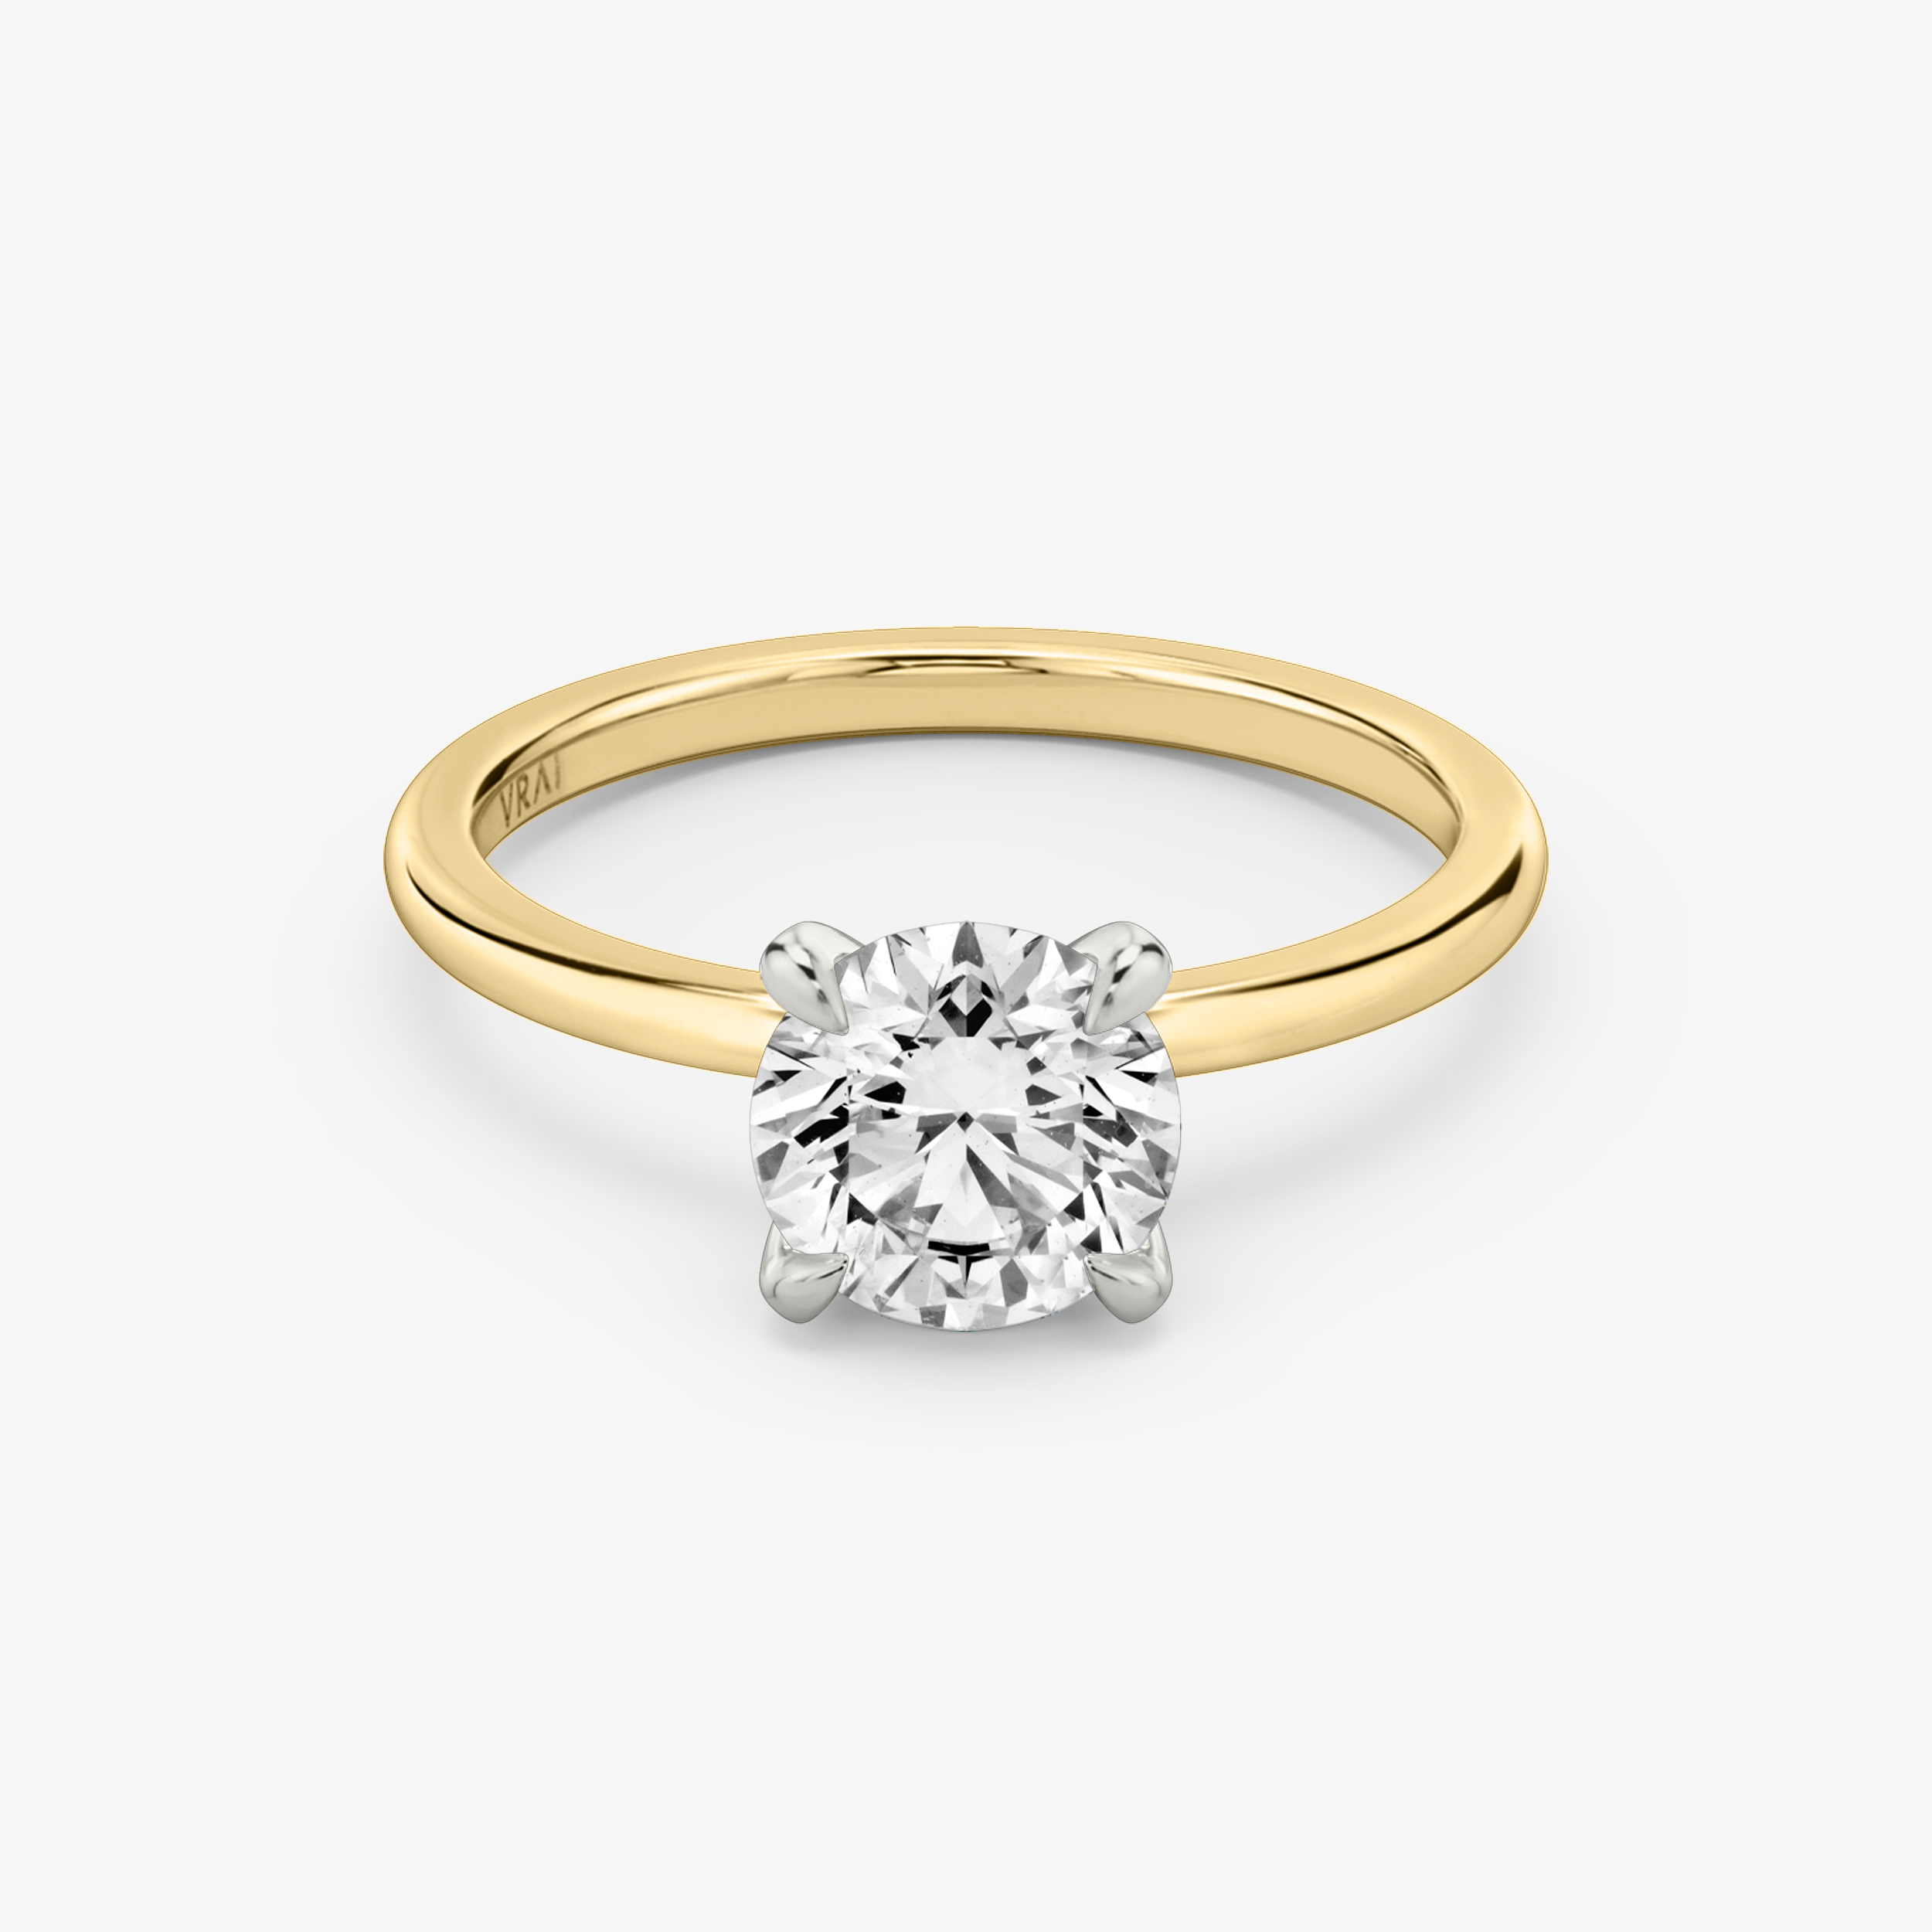 The Classic Two Tone Engagement Ring | VRAI